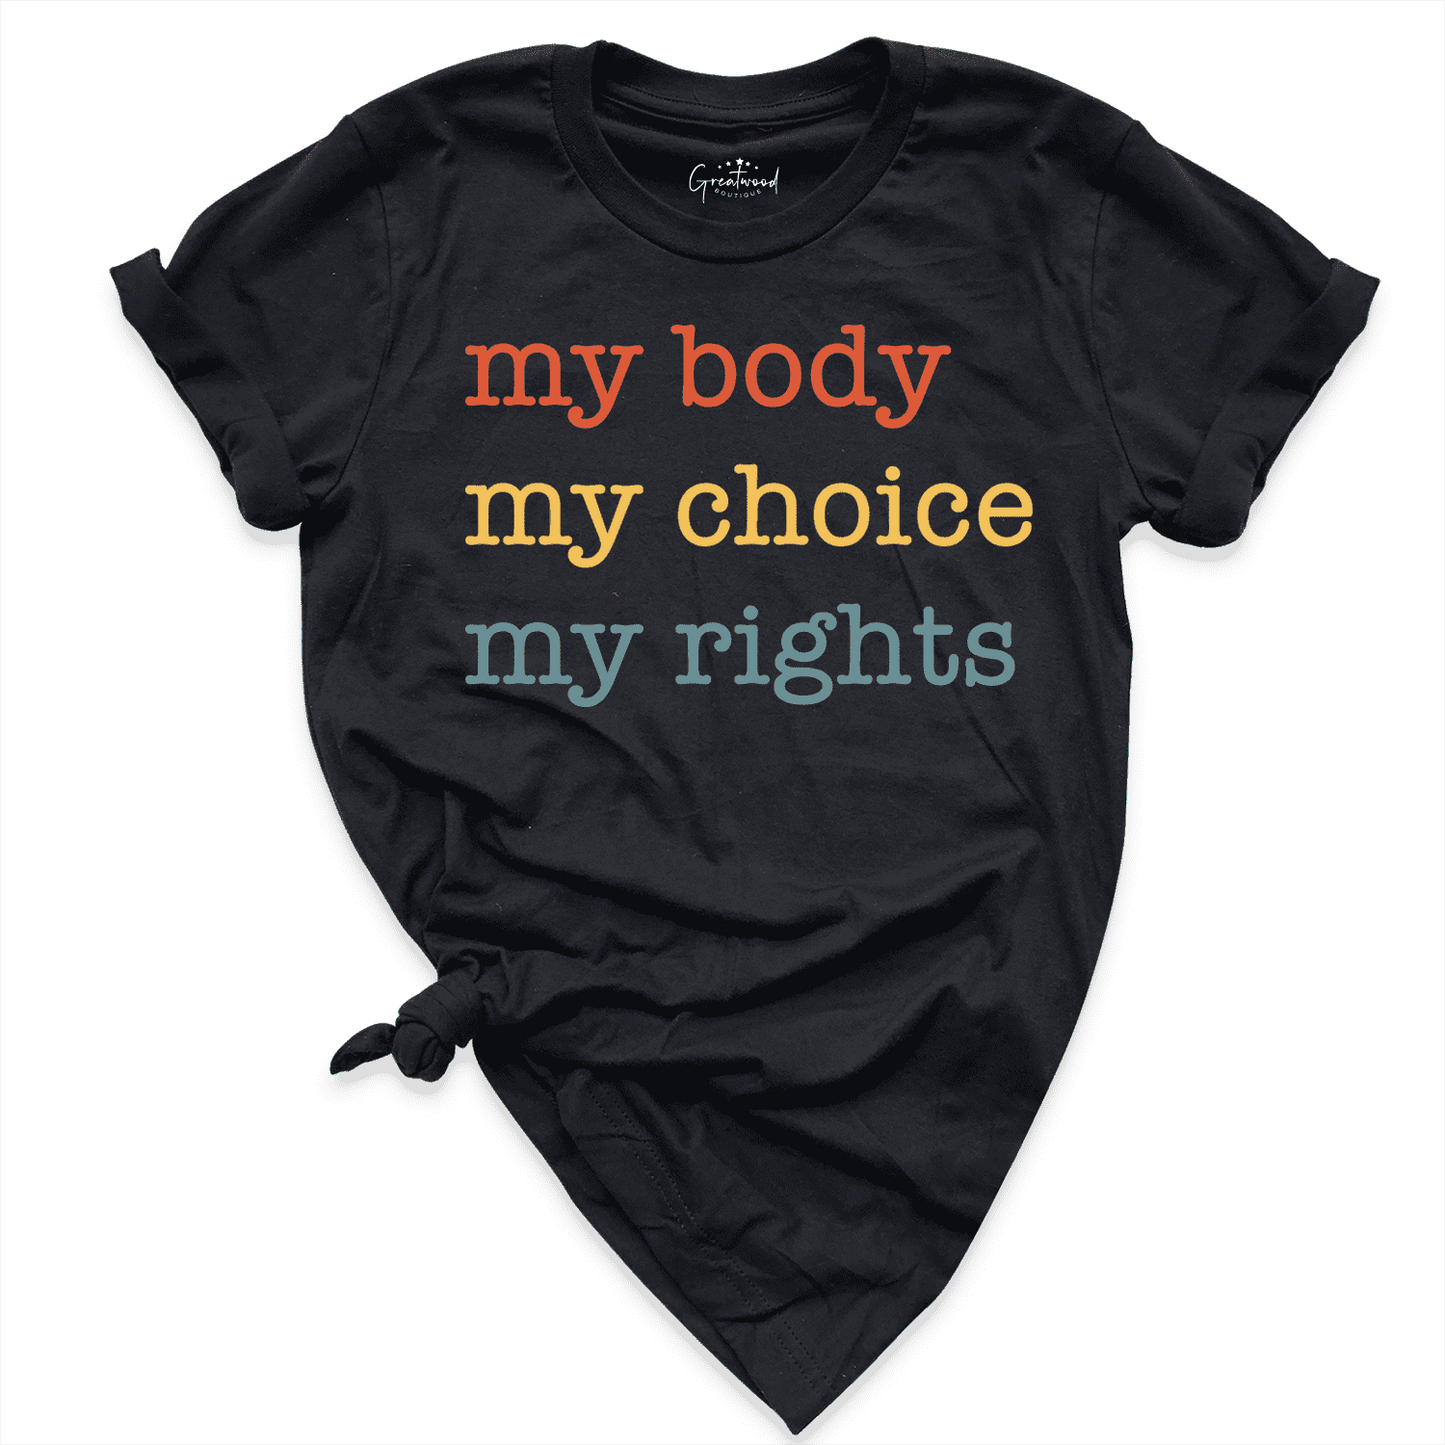 My Body My Choice My Rights Shirt Black - Greatwood Boutique